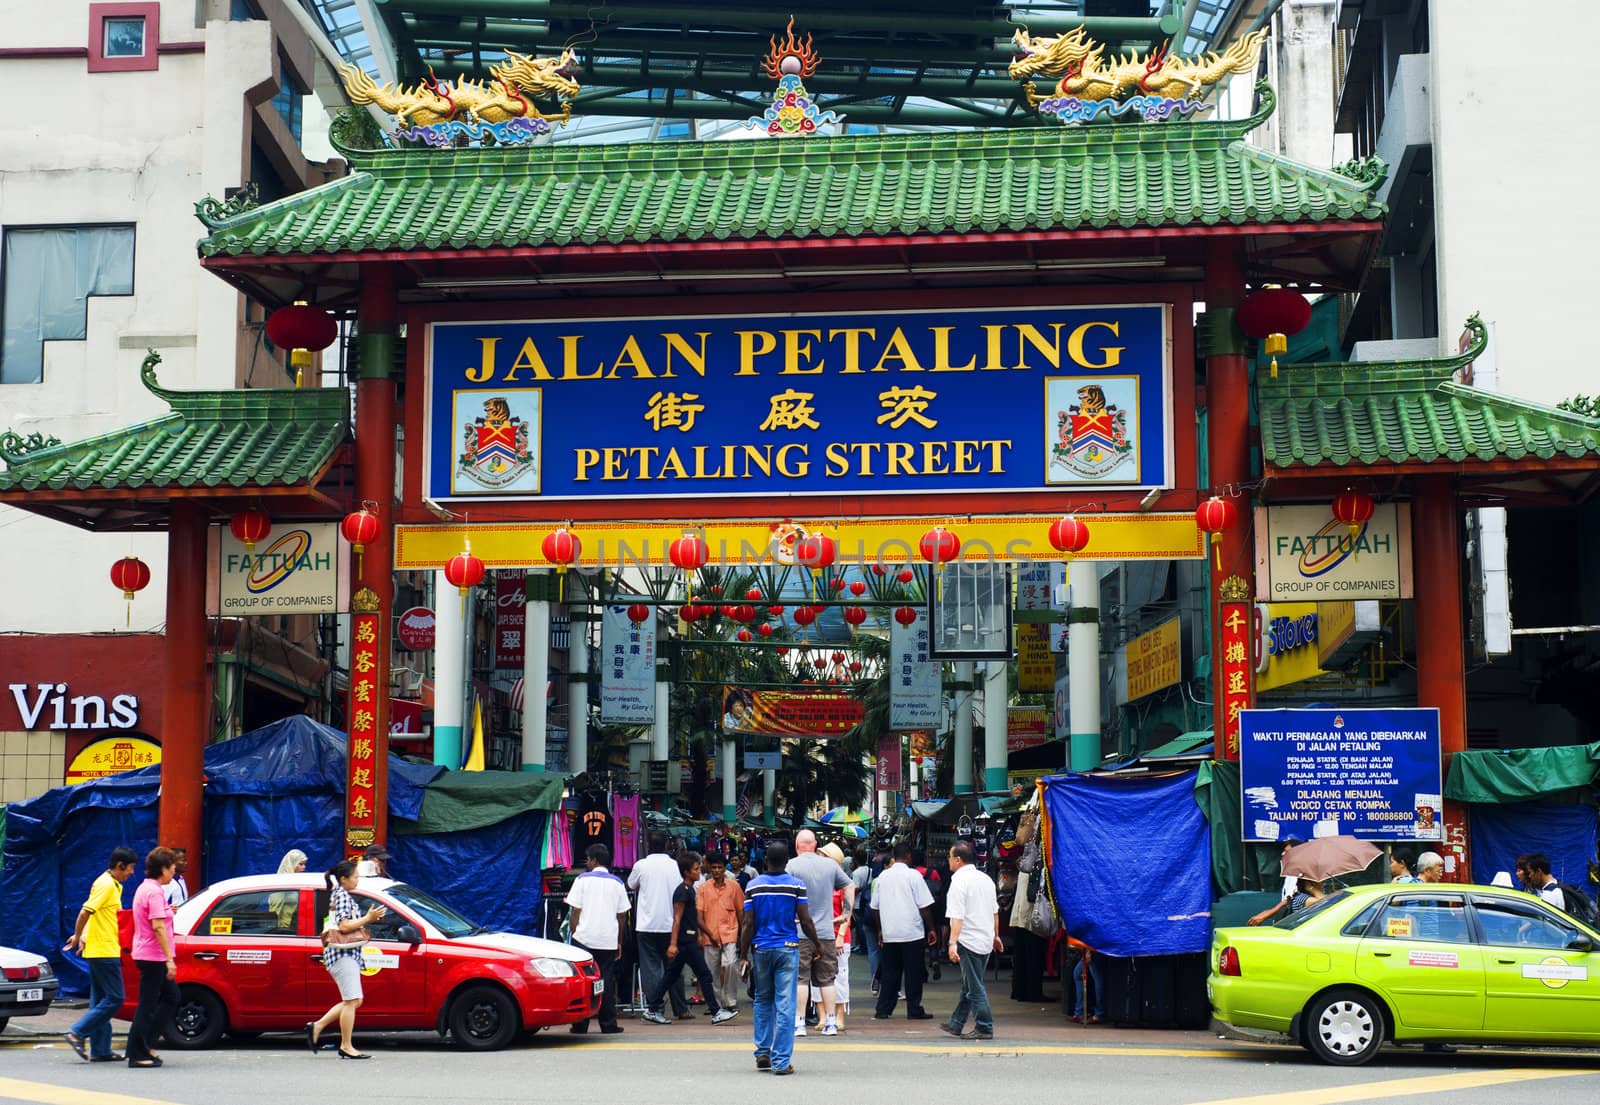 Kuala Lumpur, Malaysia - March 20, 2012: Petaling Street in Kuala Lumpur . The street is a long market which specialises in counterfeit clothes, watches and shoes. Famous tourist attraction 